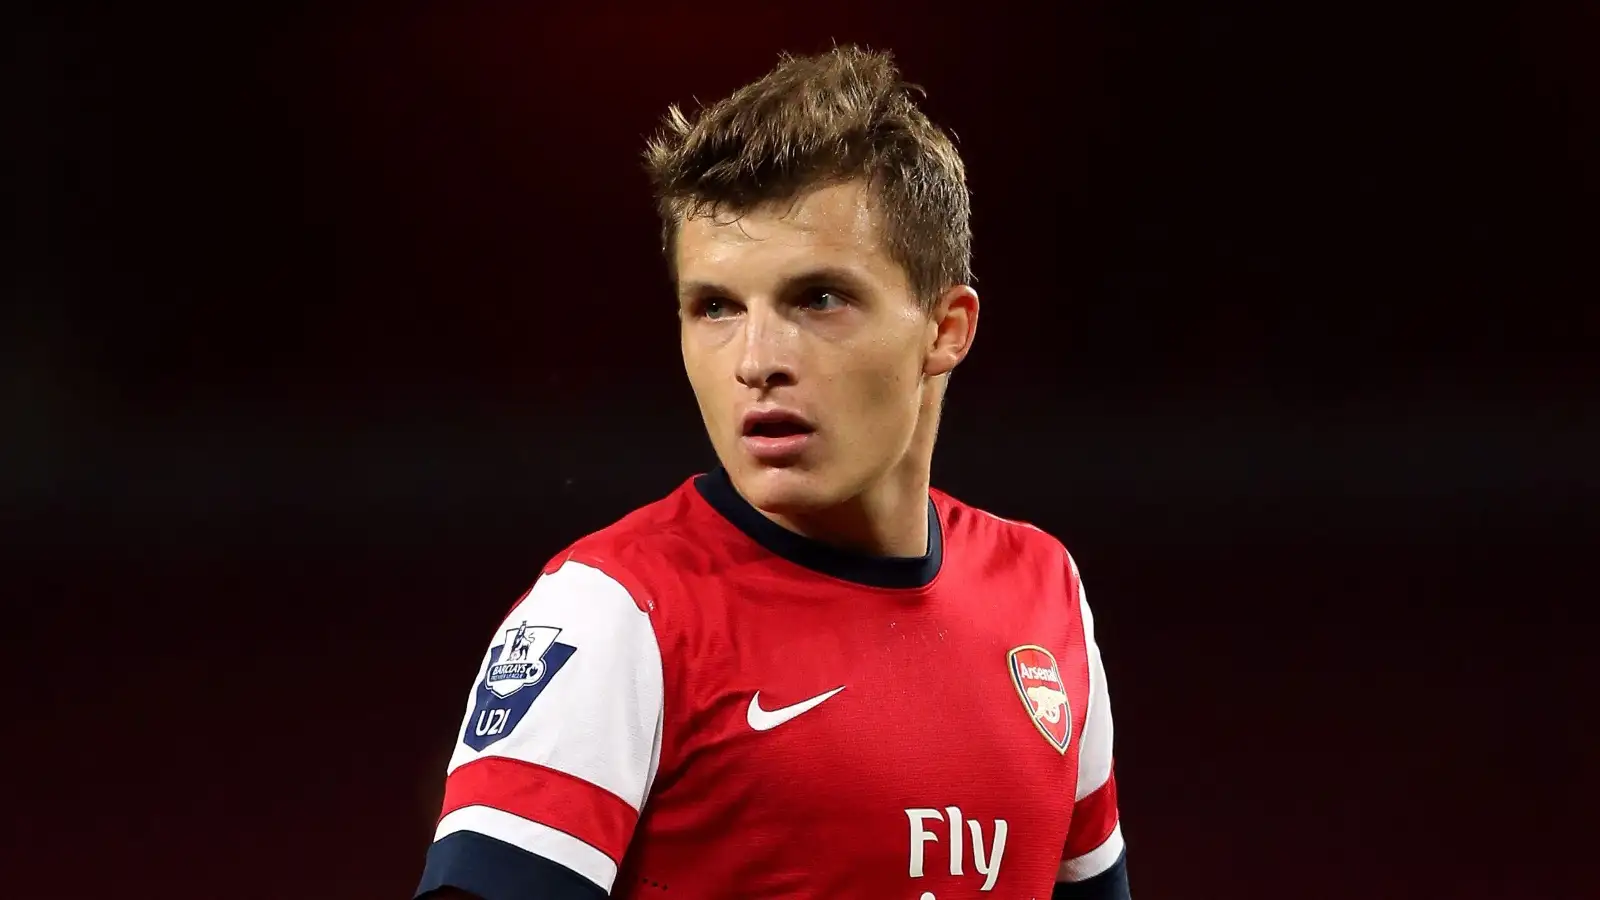 Recalling the brief moment Thomas Eisfeld was Arsenal’s new Pires